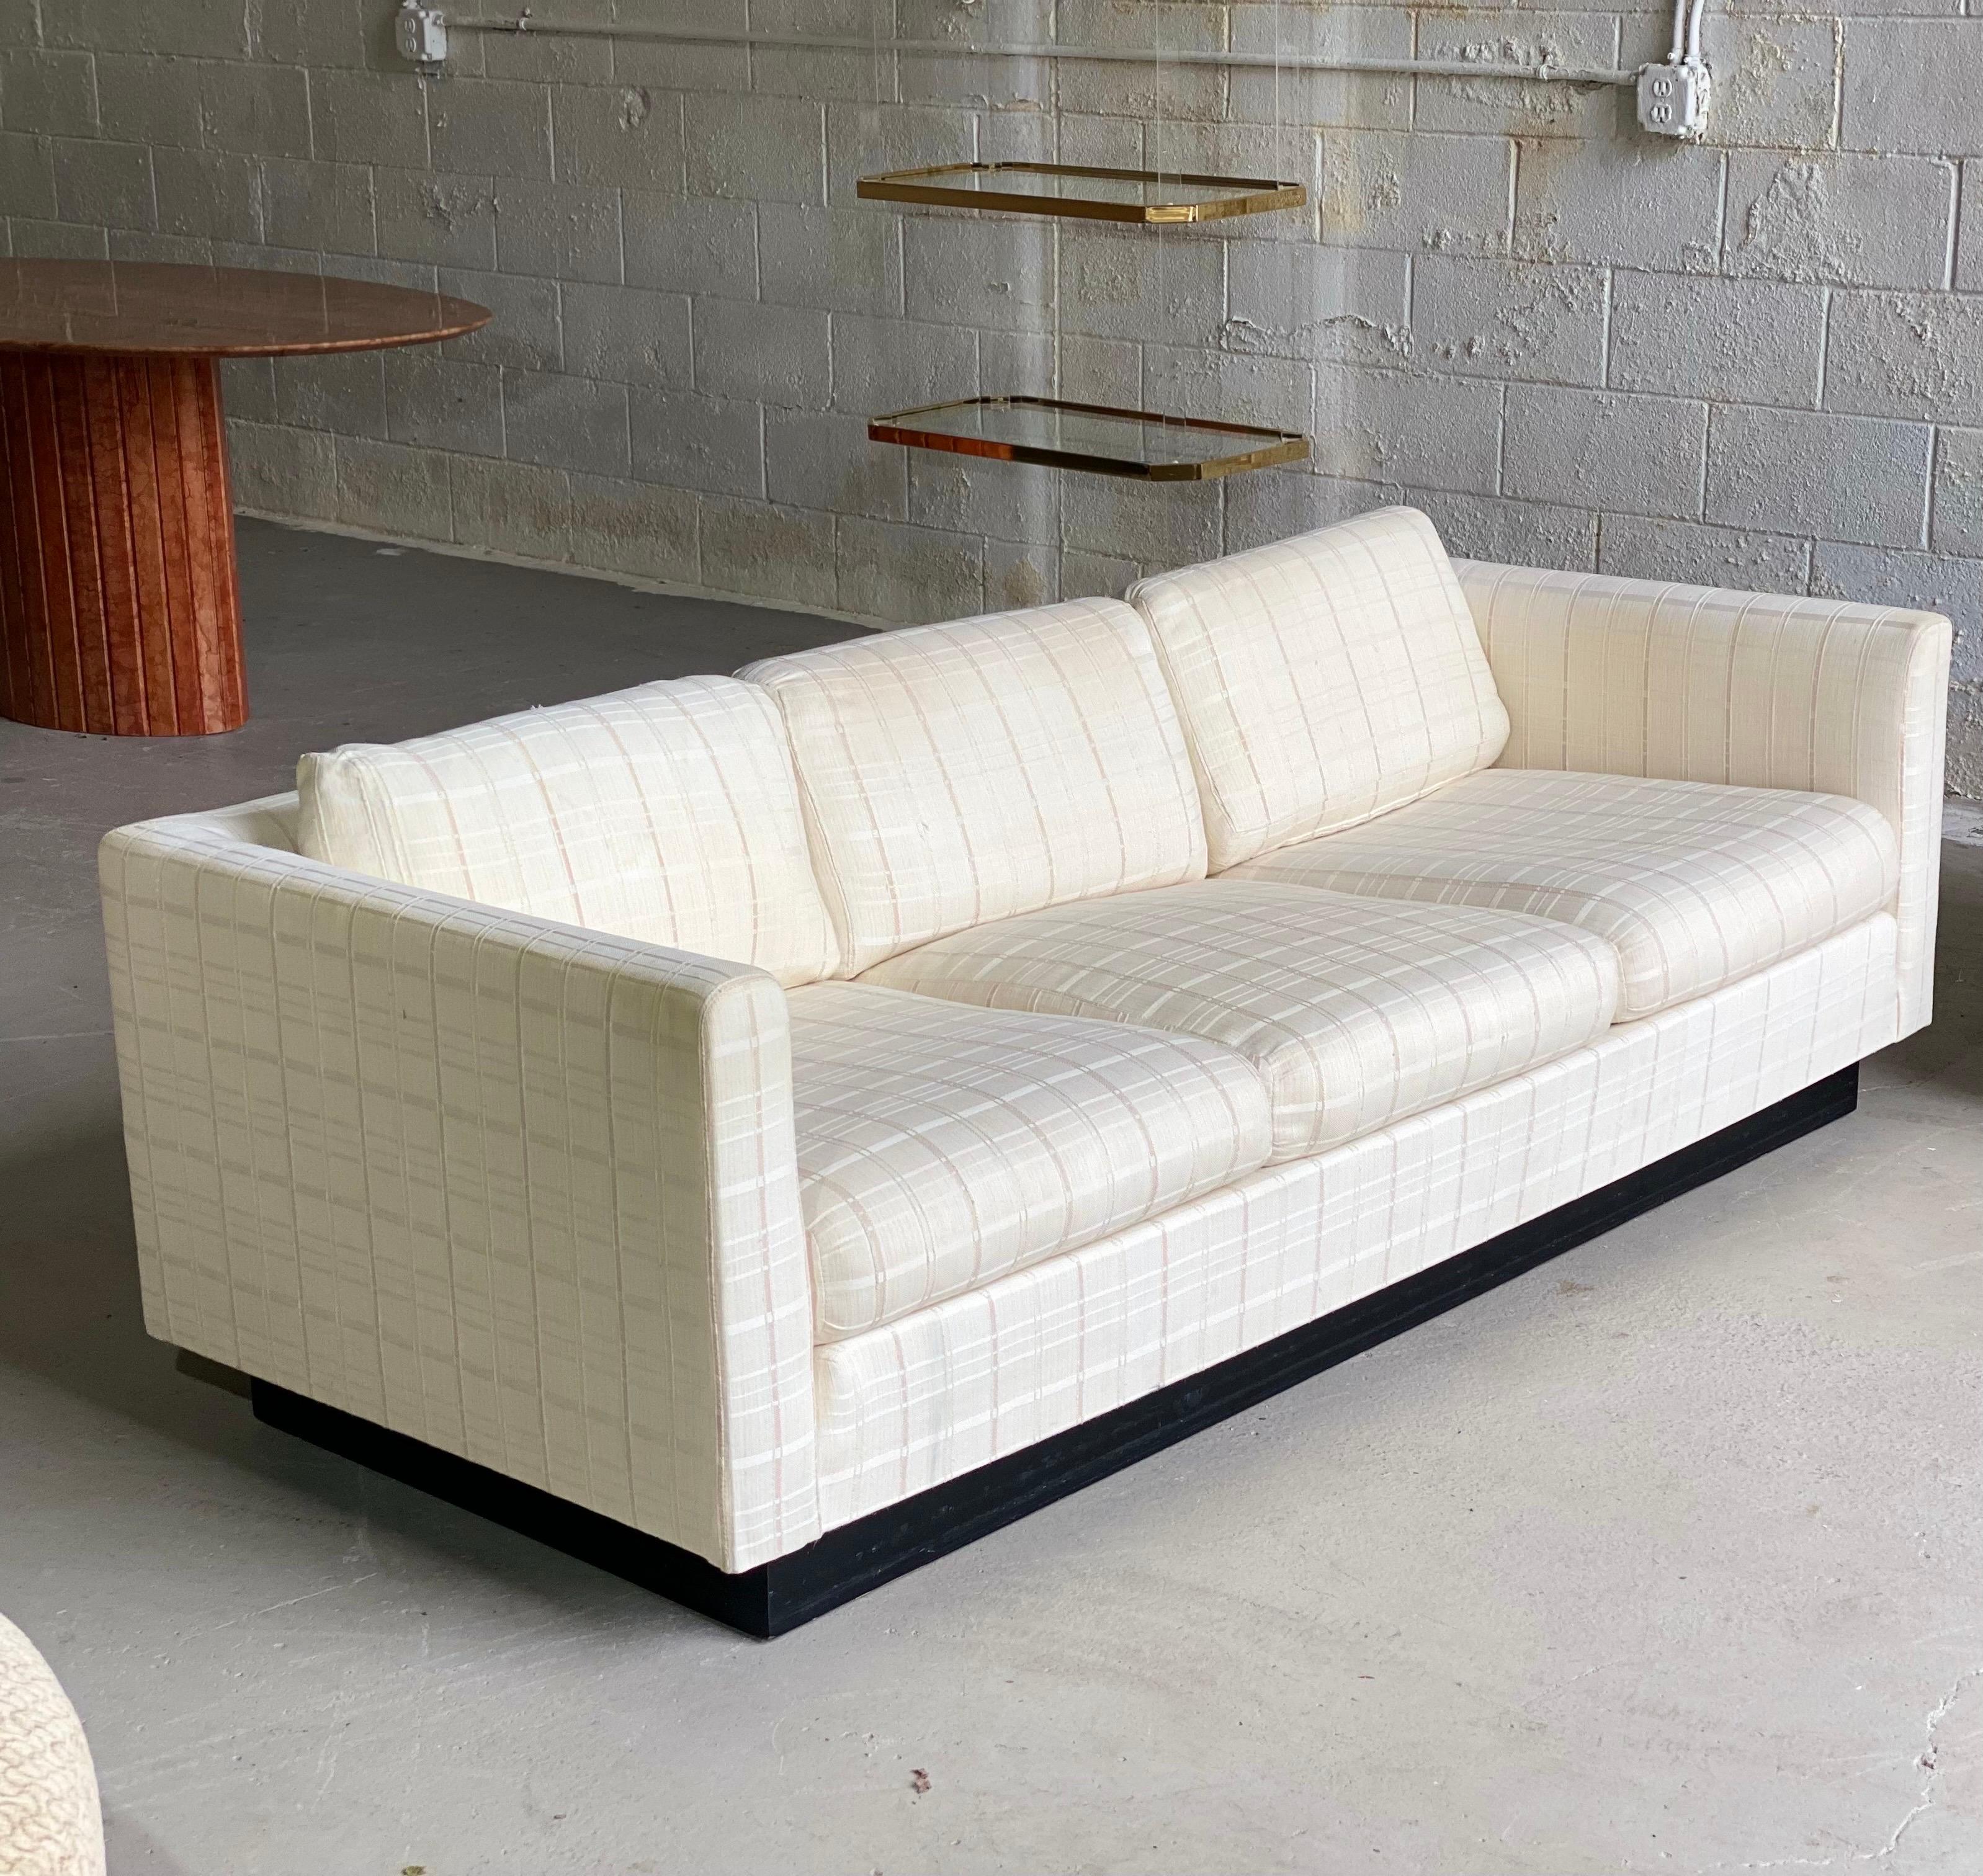 We are very pleased to offer a chic, tuxedo sofa in the style of Milo Baughman, circa the 1980s. This piece showcases a wraparound frame upholstered in a neutral linen fabric supported by a black plinth base. Some cushions have a few stains, but